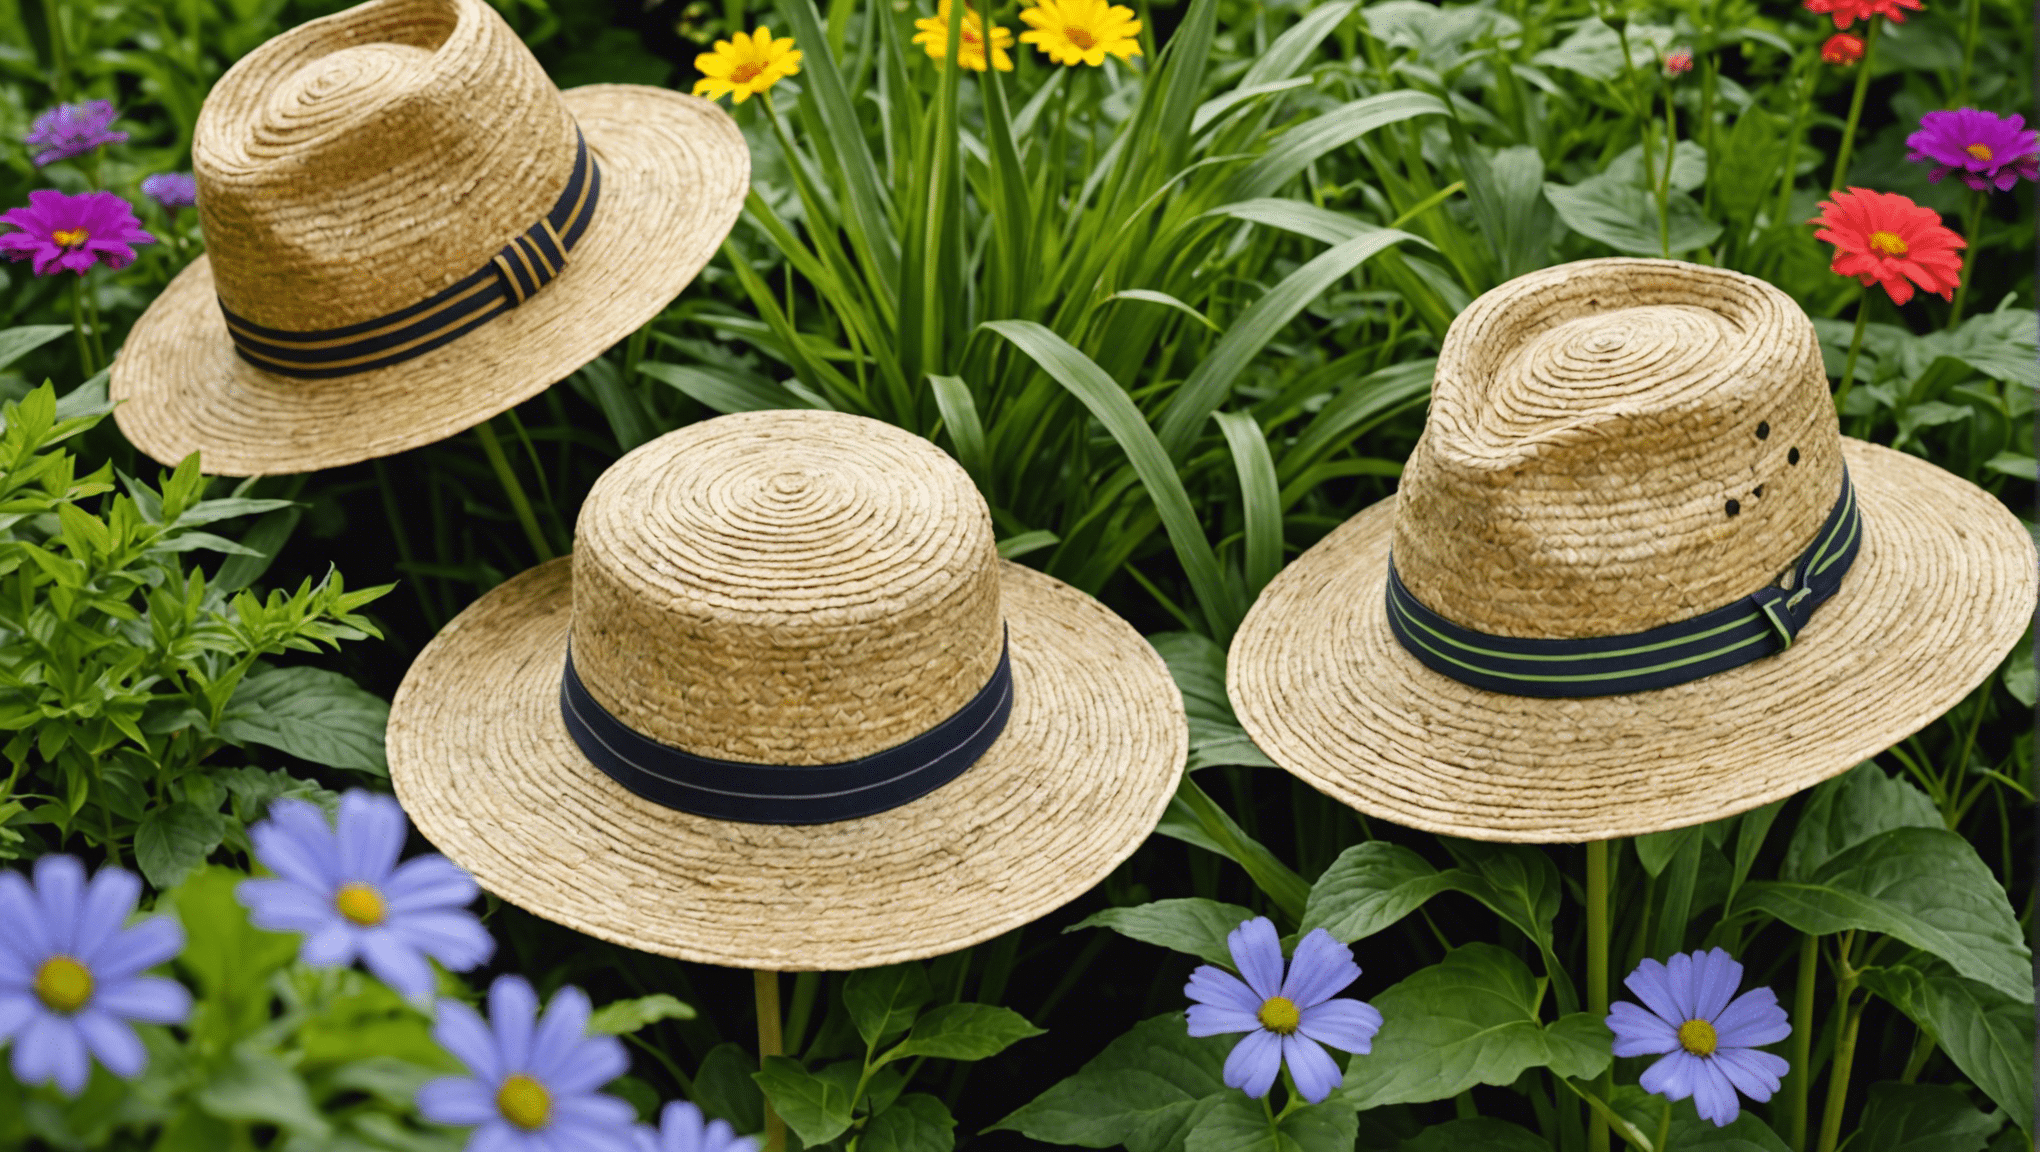 discover the advantages of selecting a straw gardening hat, including uv protection, breathability, and timeless style.